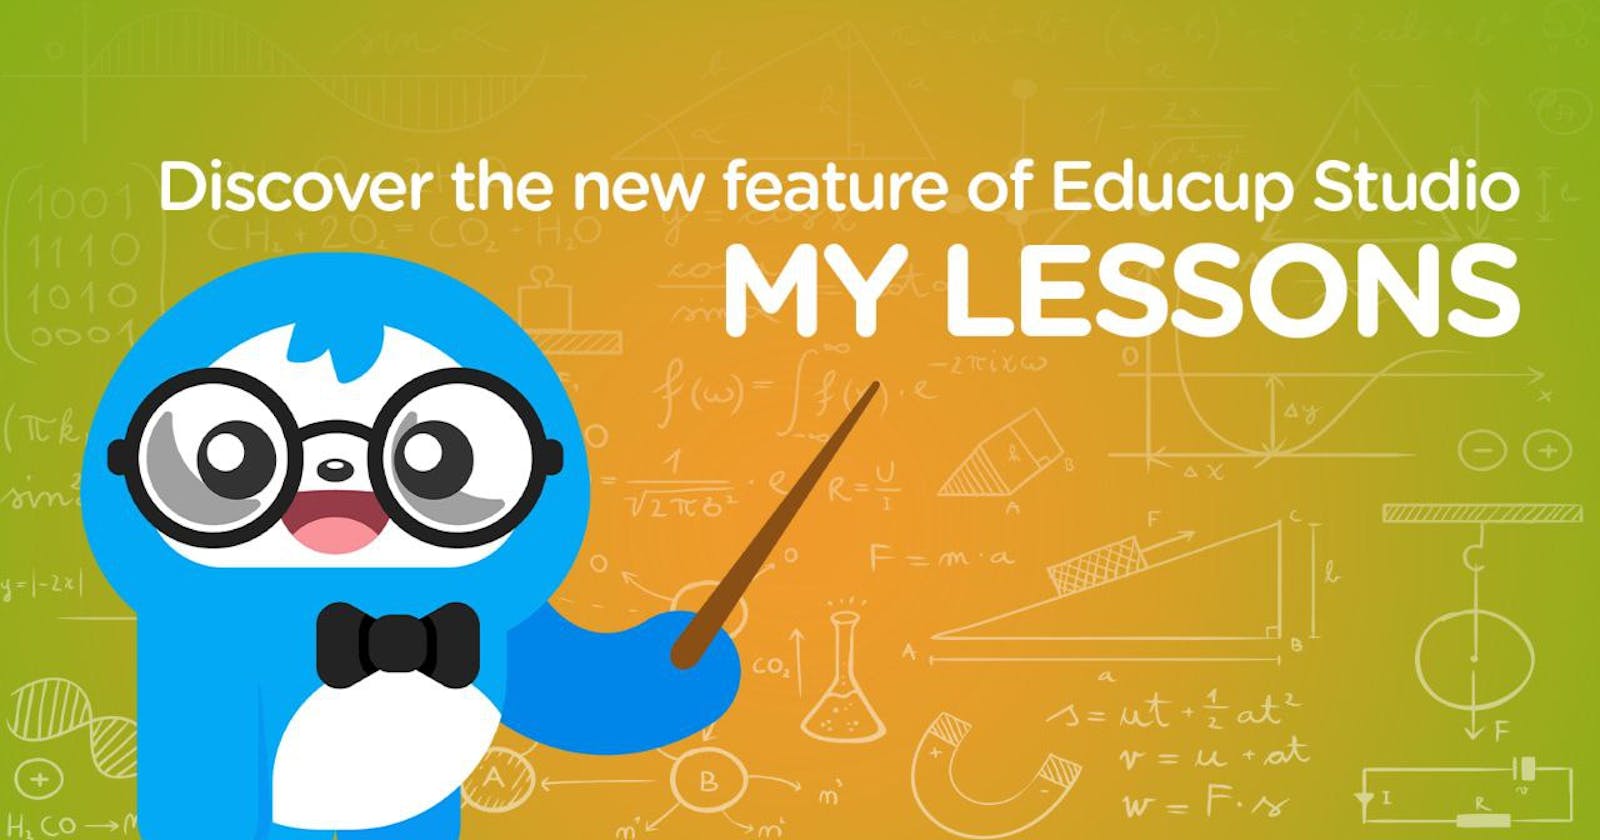 Explore the new feature "My Lessons" from EducUp Studio 🚀